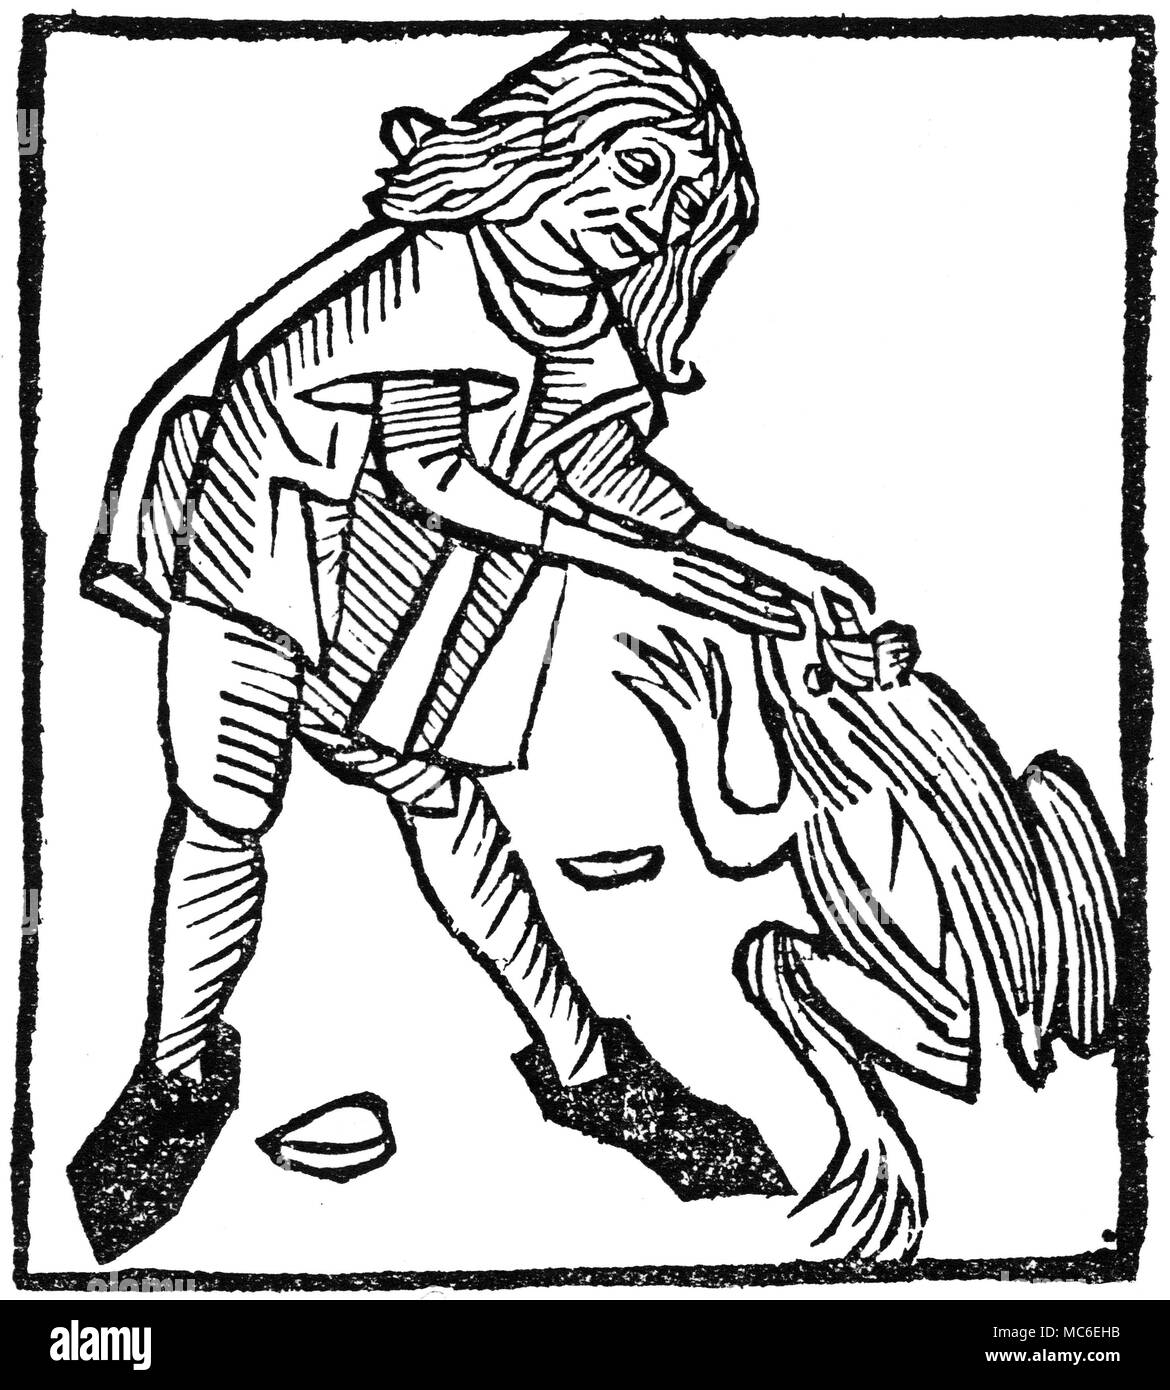 MAGIC - THE TOAD STONE Man extracting the Toadstone, for magical purposes. Woodcut from the 1510 French edition of Hortus Sanitatis. Stock Photo